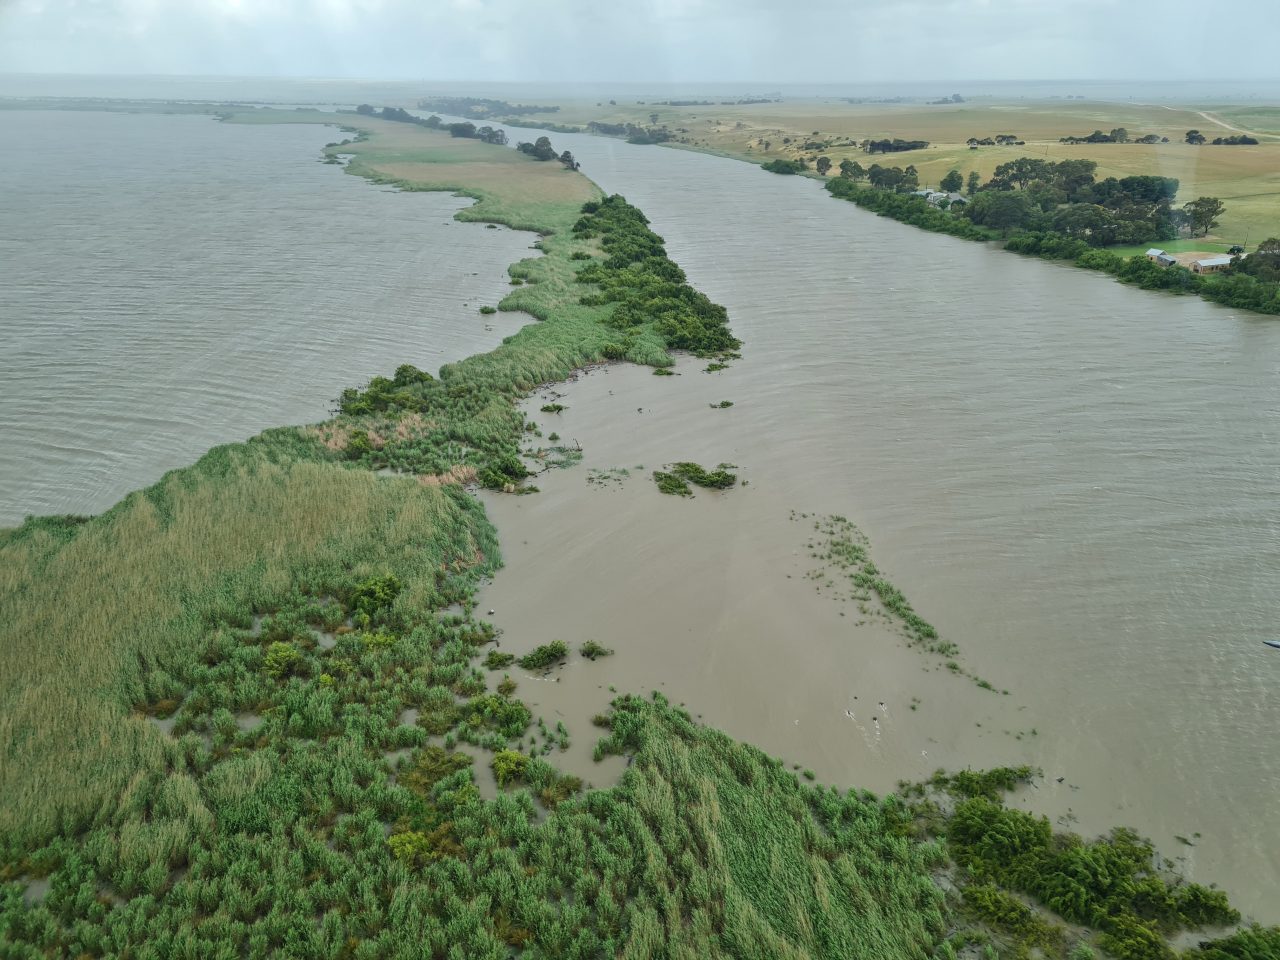 Aerial photo of a lake being divide by a long thin vegetated island.